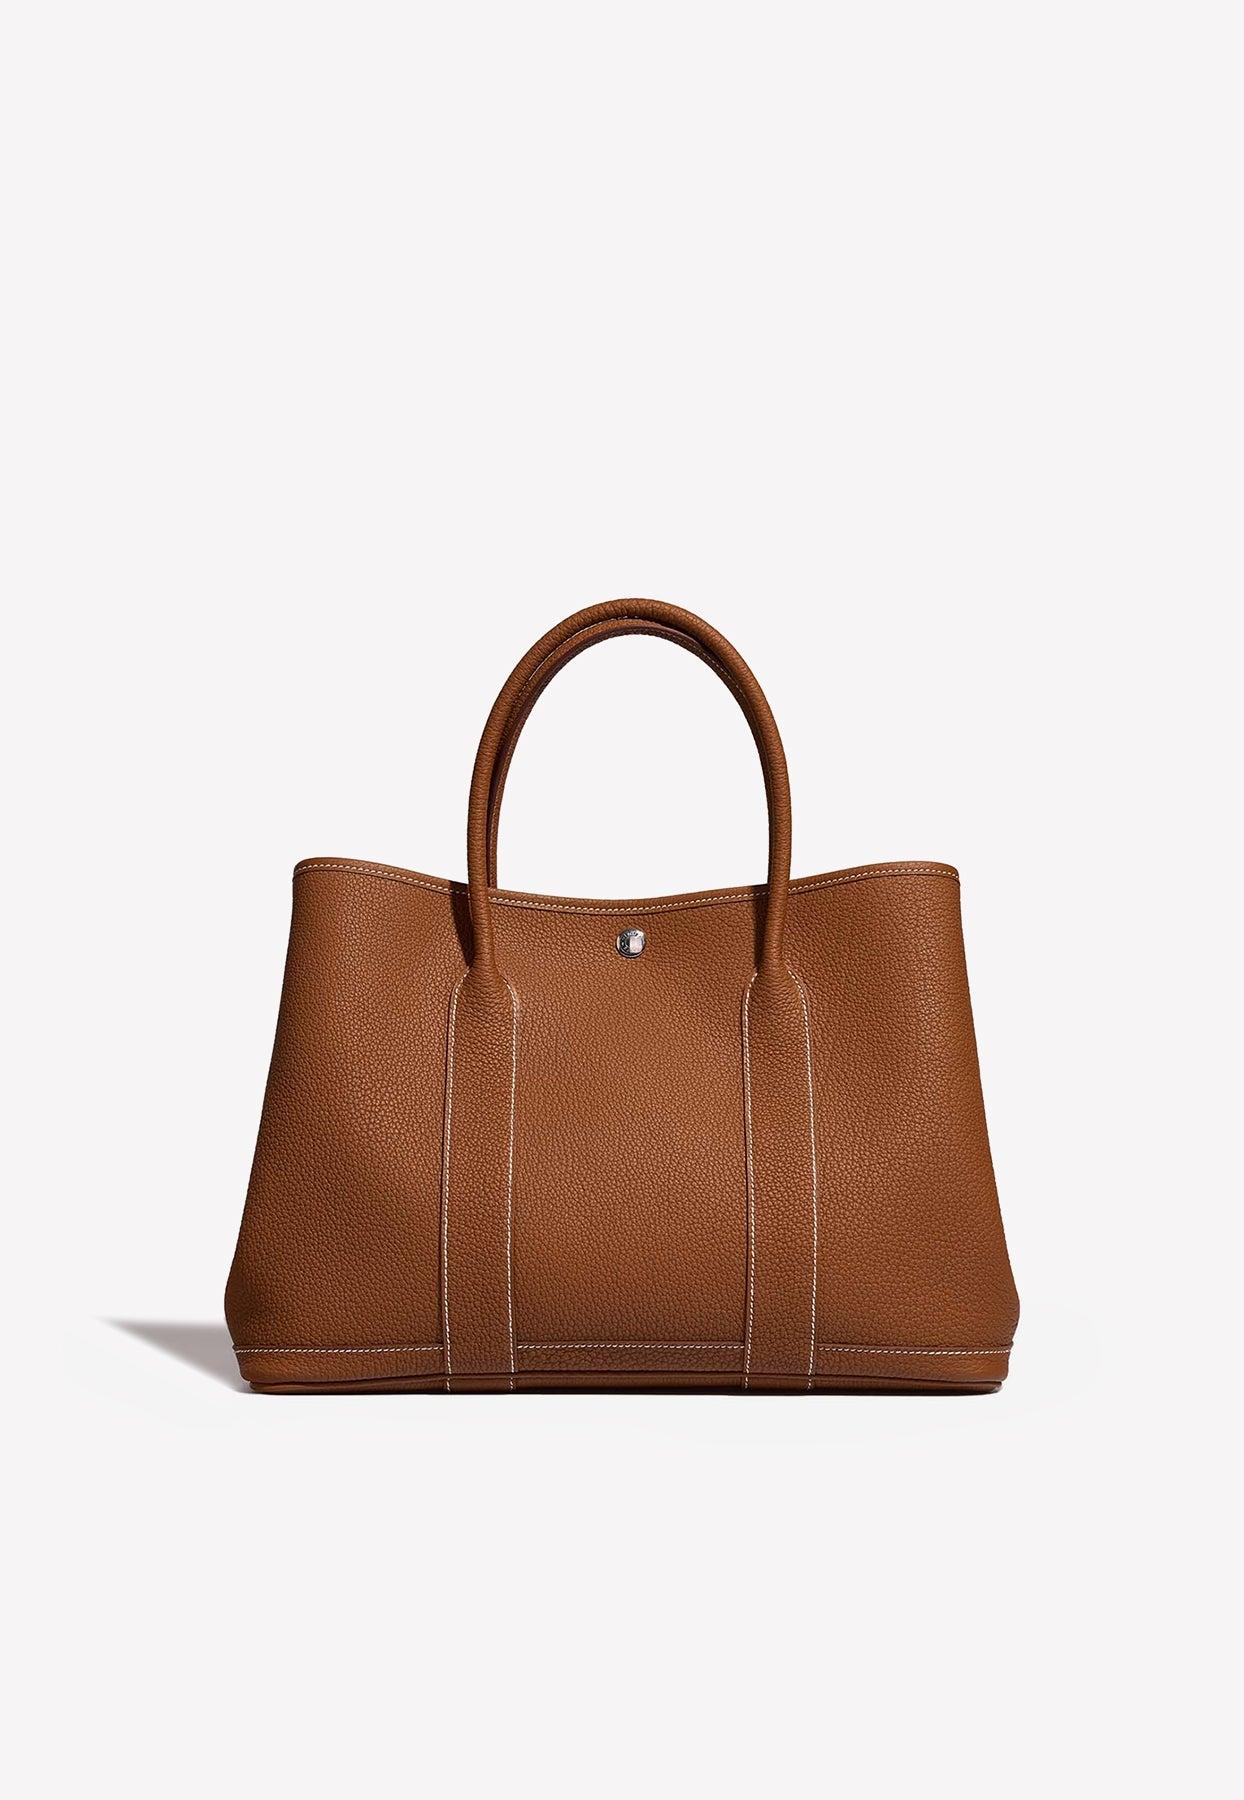 Hermes Garden Party 30 Bag In Gold Clemence Leather 